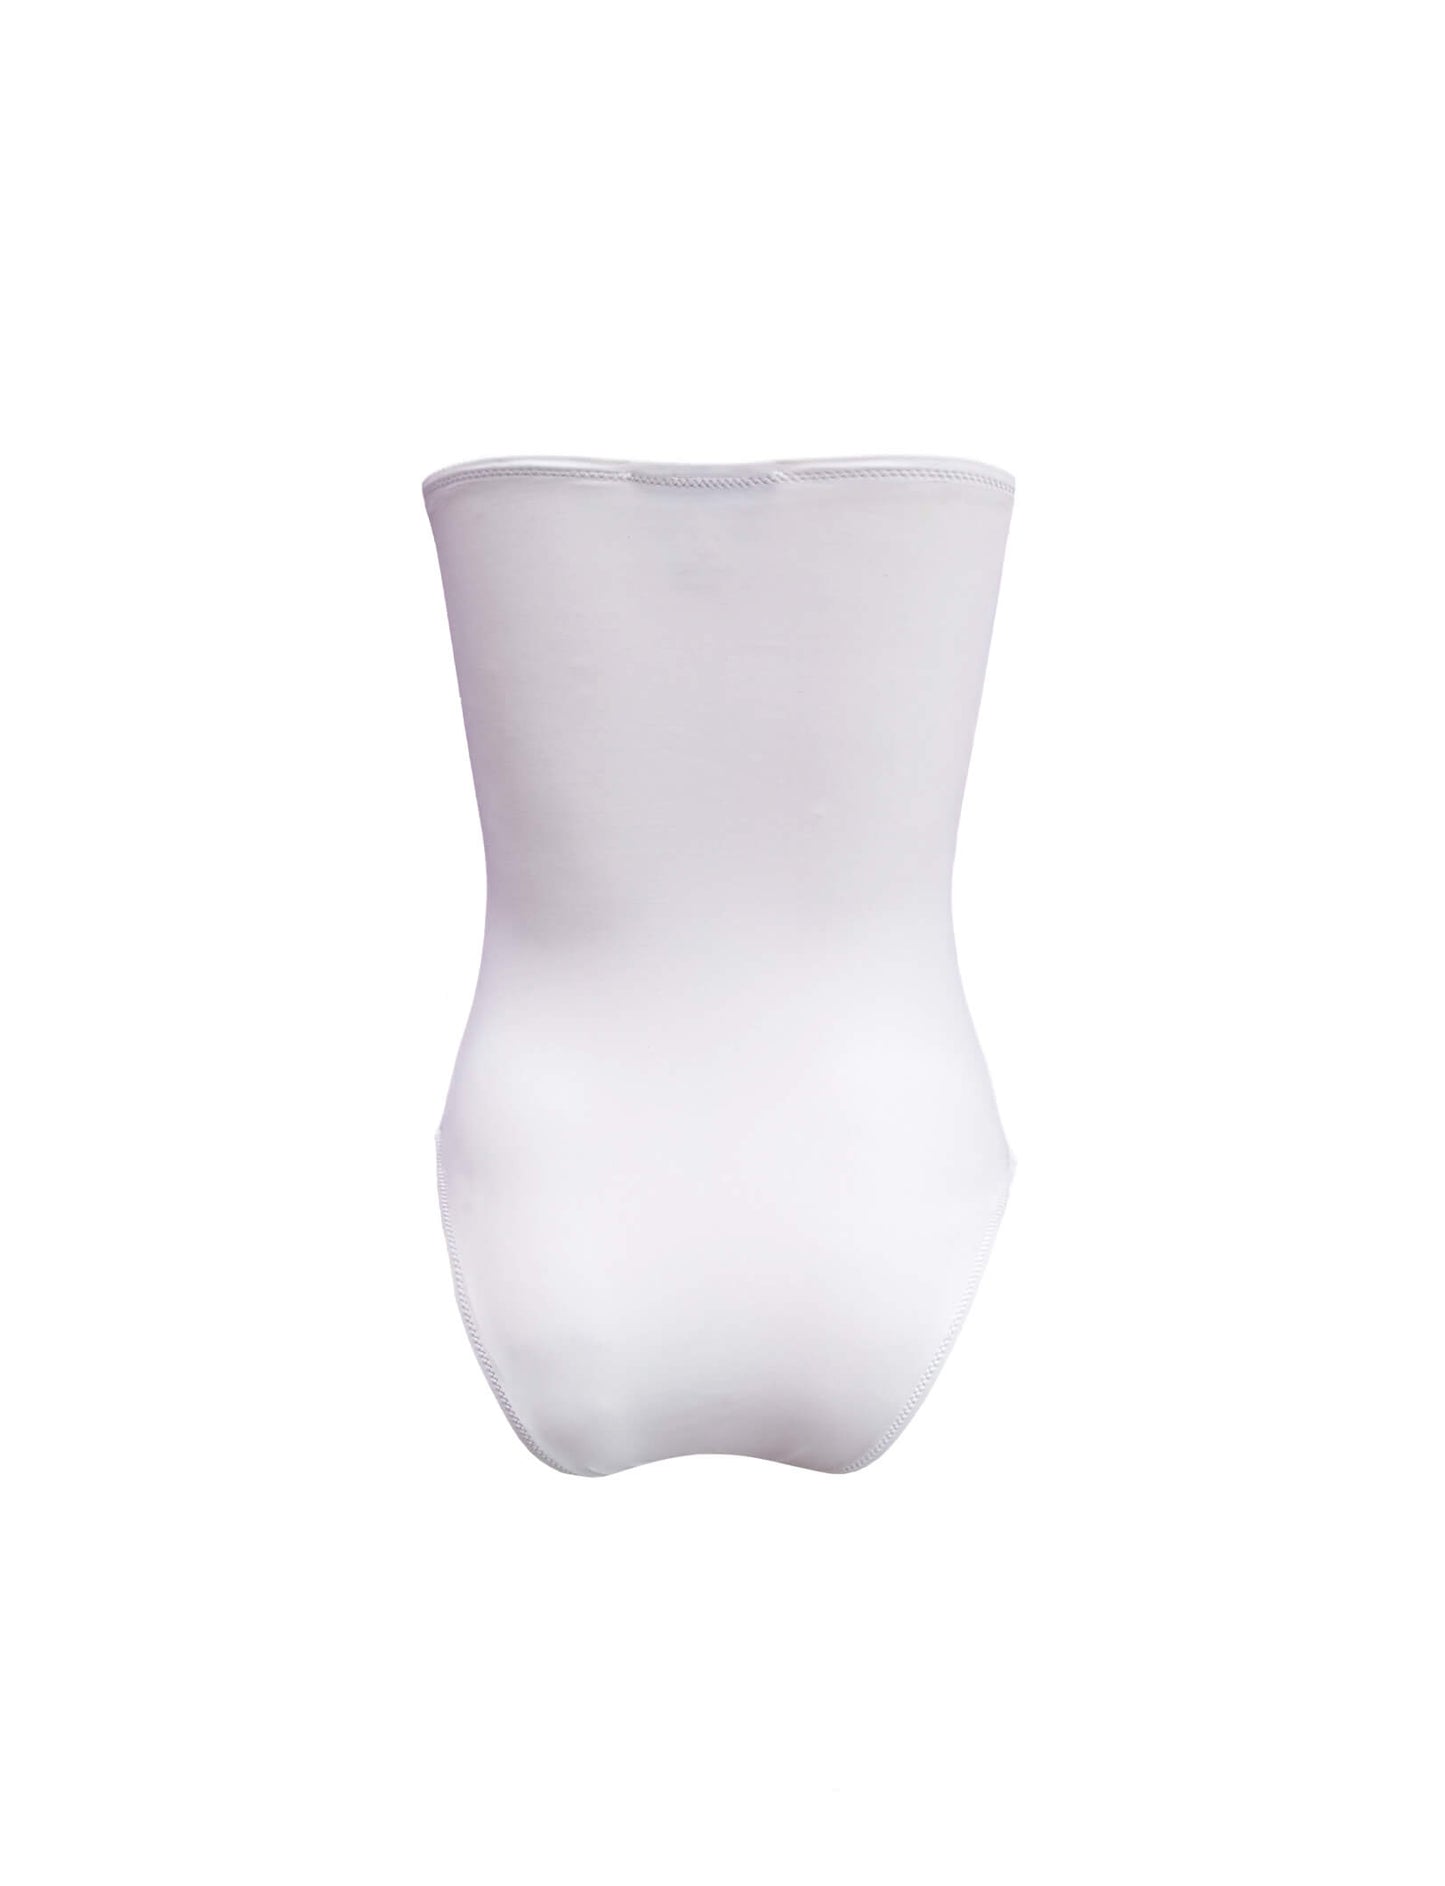 Nayades the Label women's swimsuit Coco de Mer One-Piece in White, displayed back on a ghost mannequin.